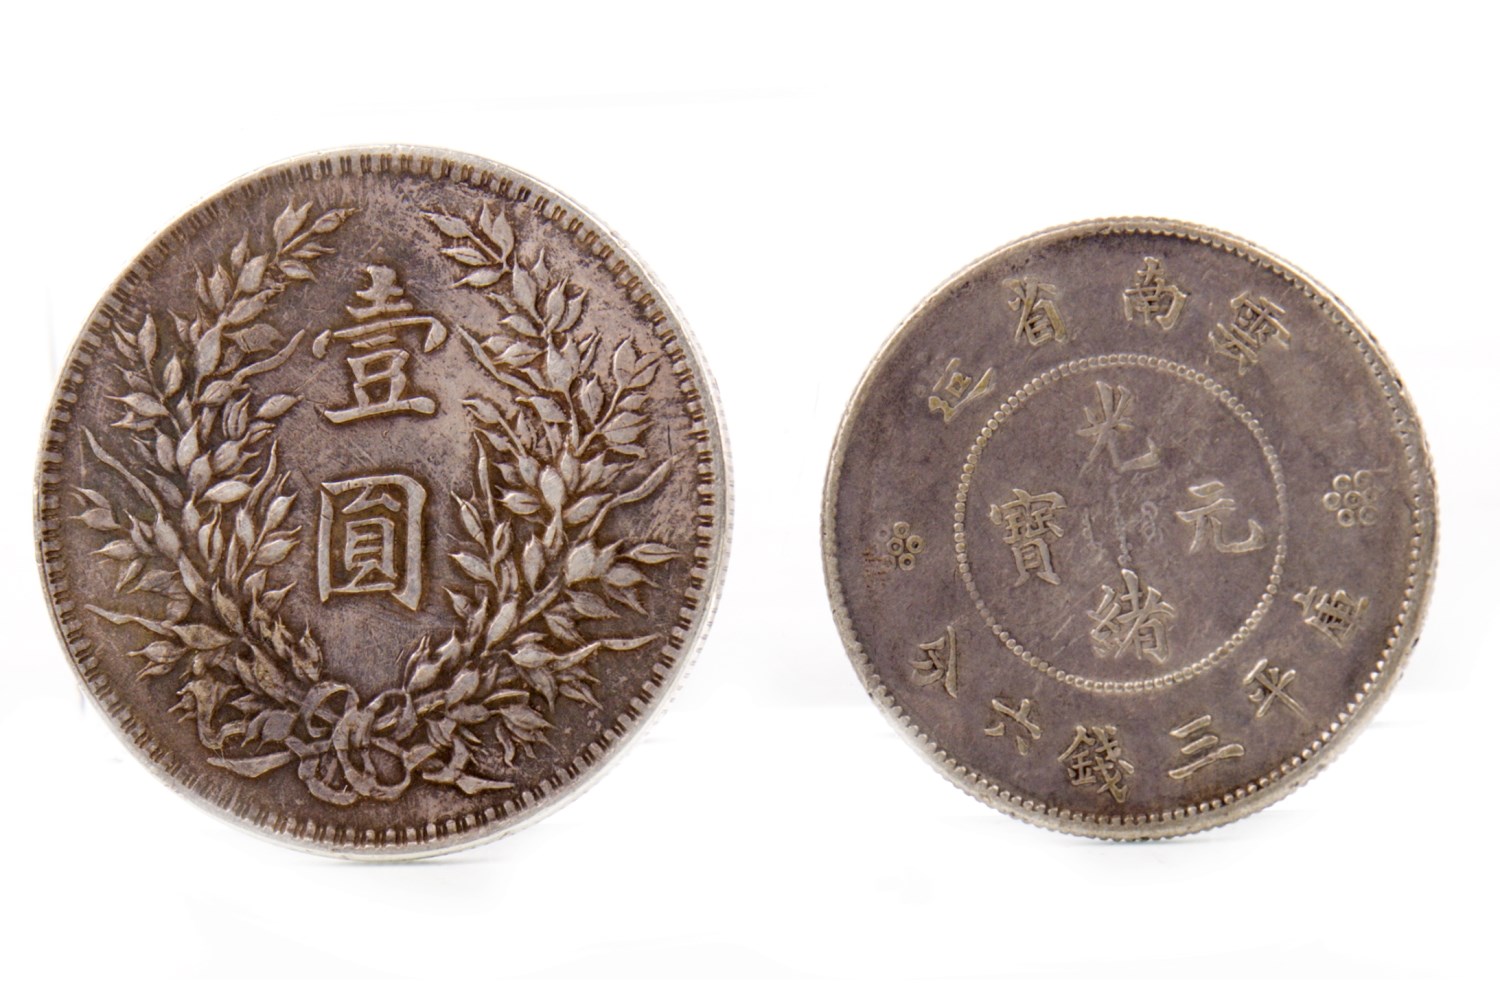 A CHINESE REPUBLIC YAN AND ANOTHER COIN